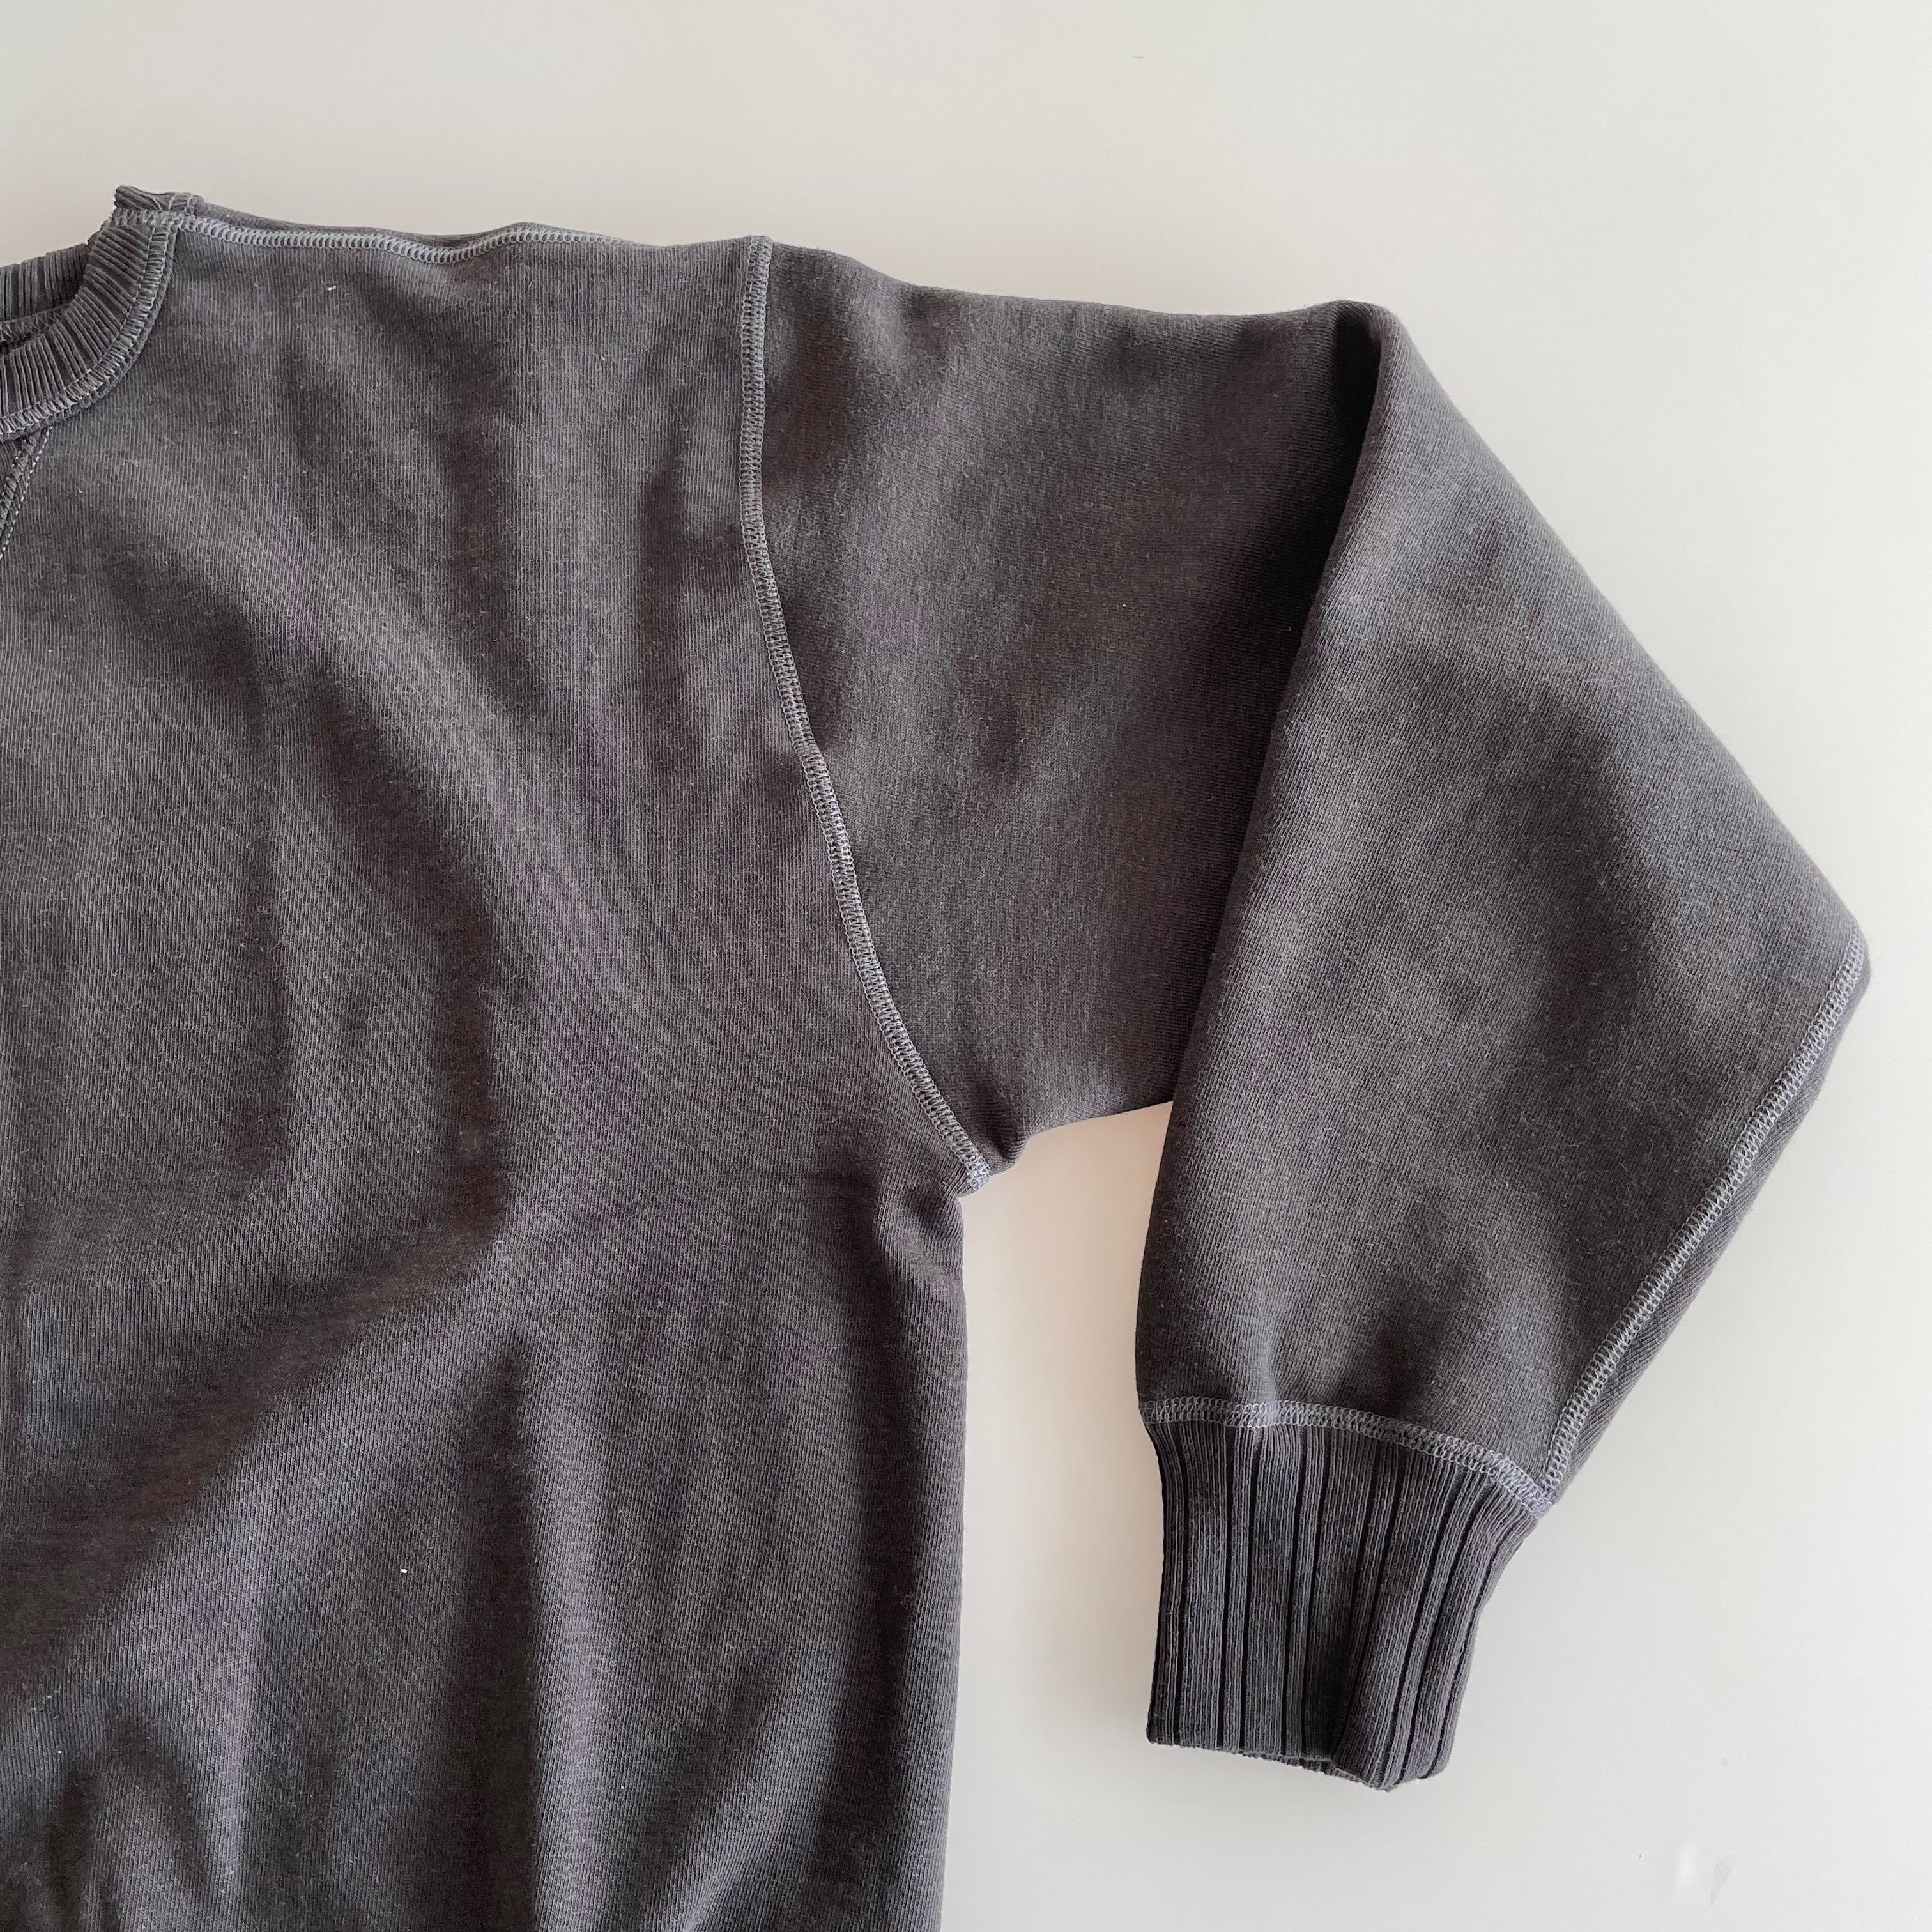 Double-V Set-In Sleeve Tsuriami Loopwheel Mother Cotton Sweat Shirt in Ink Black